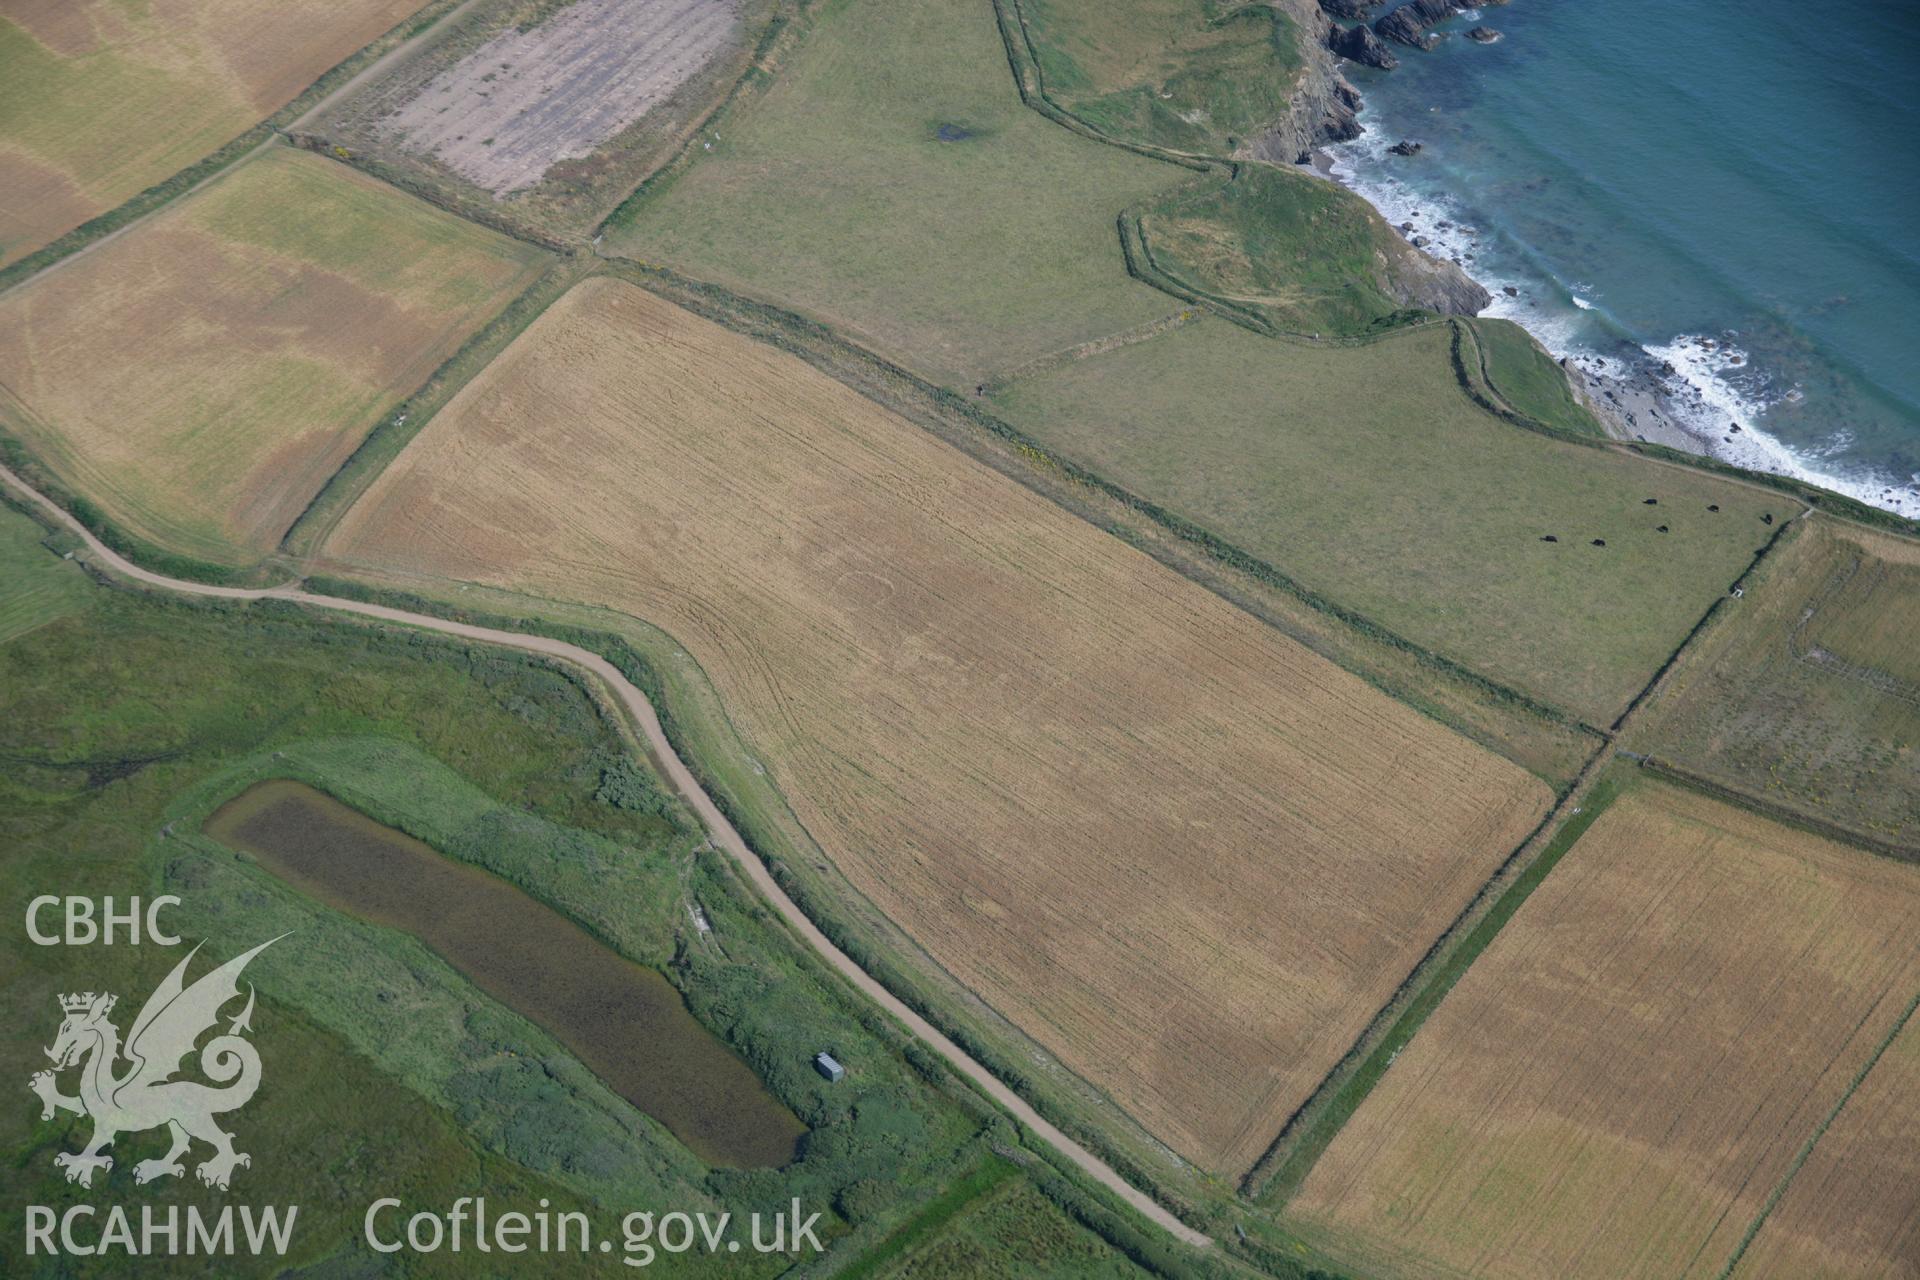 RCAHMW colour oblique aerial photograph of Runwayskiln Prehistoric Settlement Cropmarks. Taken on 24 July 2006 by Toby Driver.